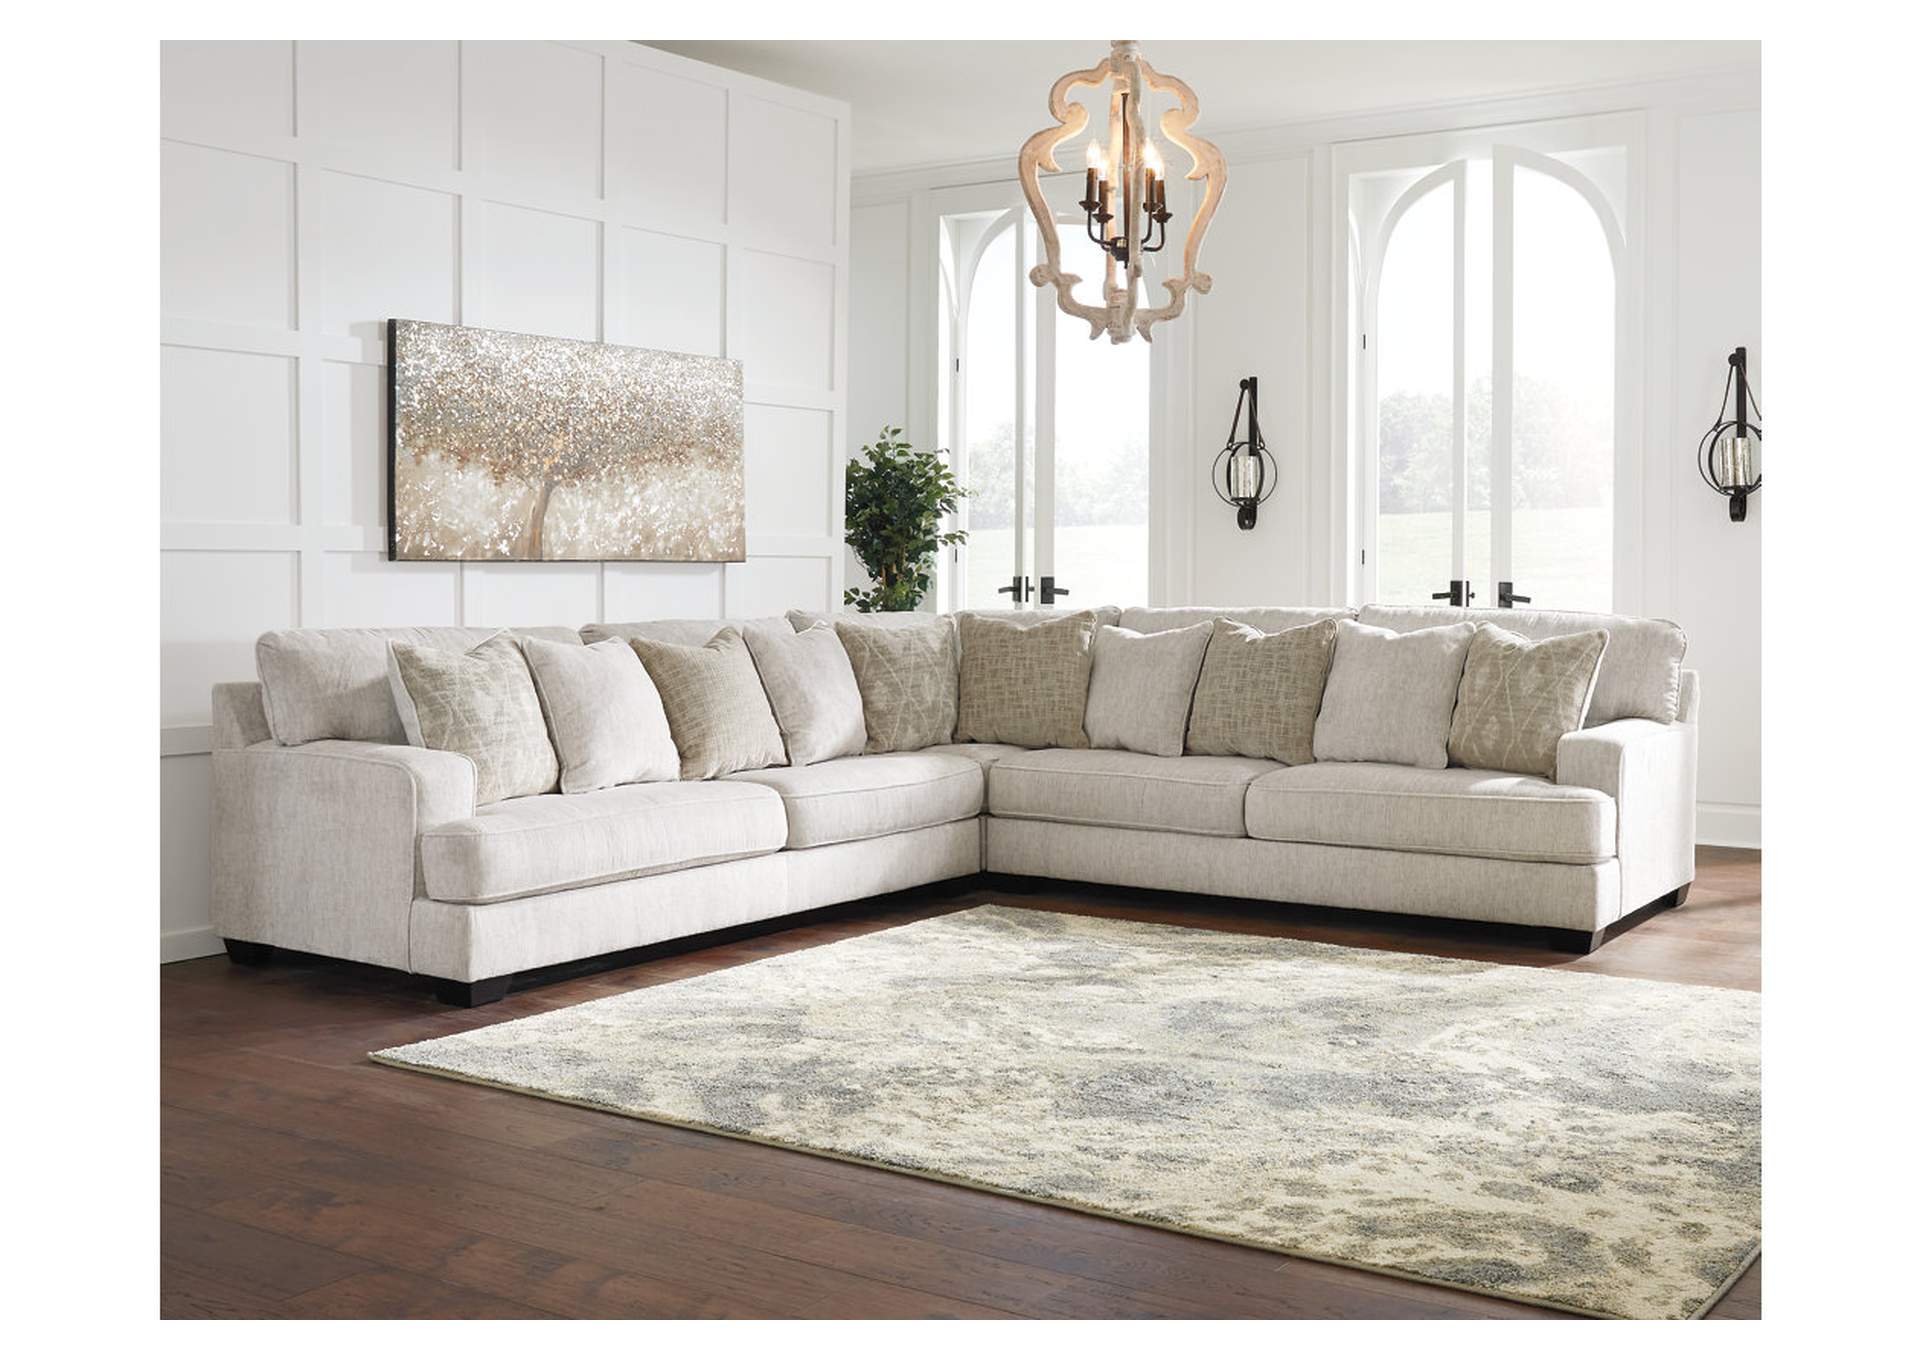 Rawcliffe 5-Piece Sectional,Signature Design By Ashley